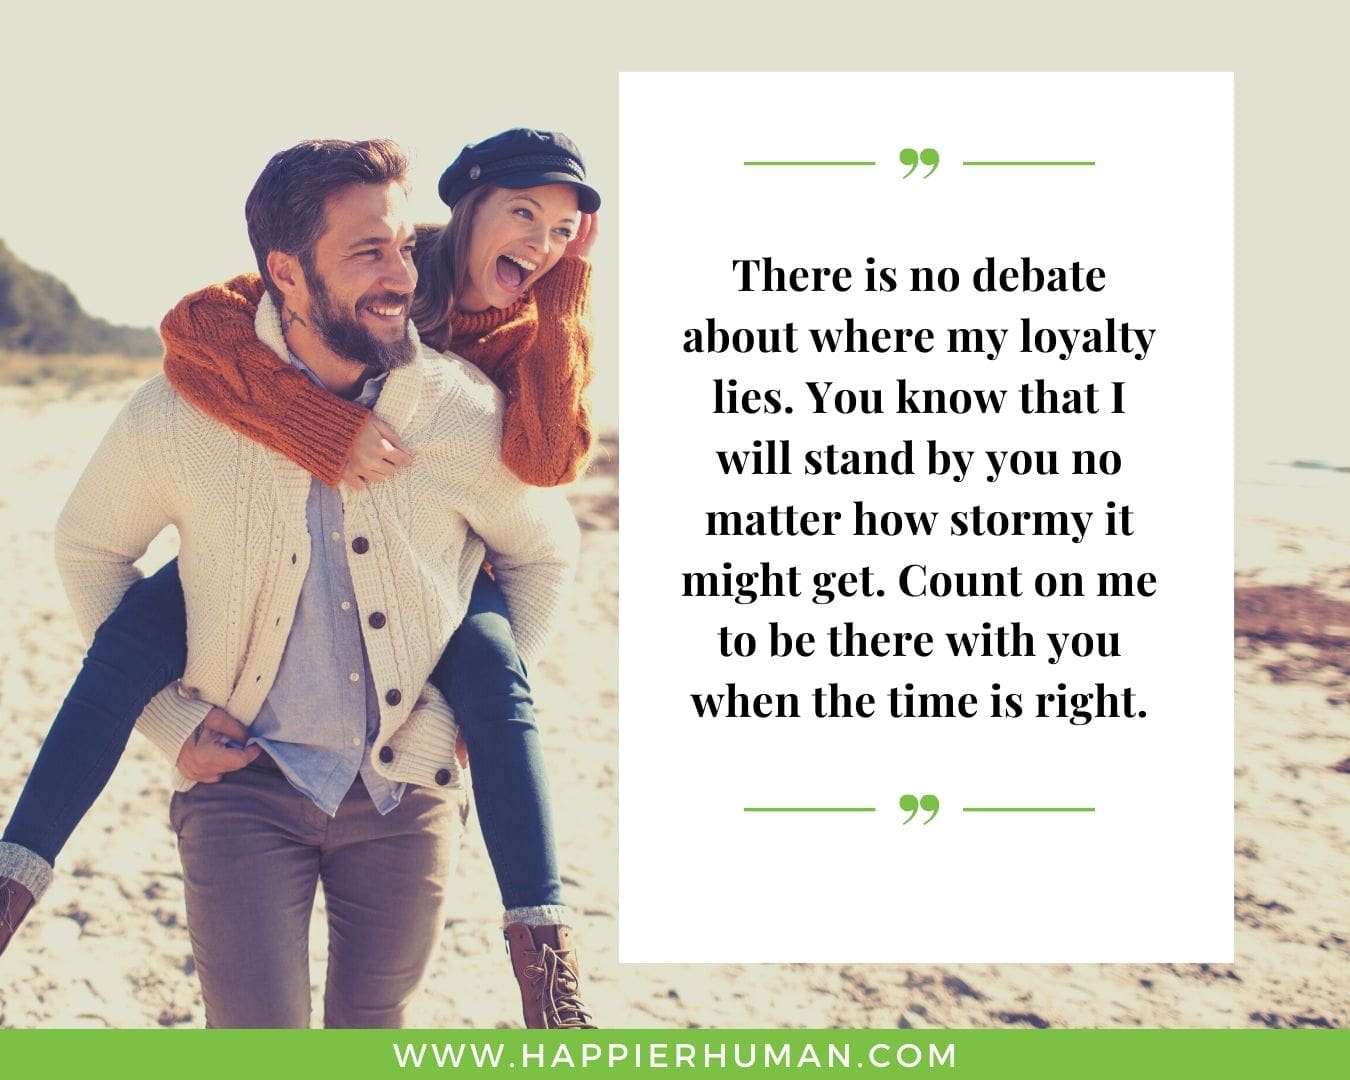 I’m Here for You Quotes - “There is no debate about where my loyalty lies. You know that I will stand by you no matter how stormy it might get. Count on me to be there with you when the time is right.”